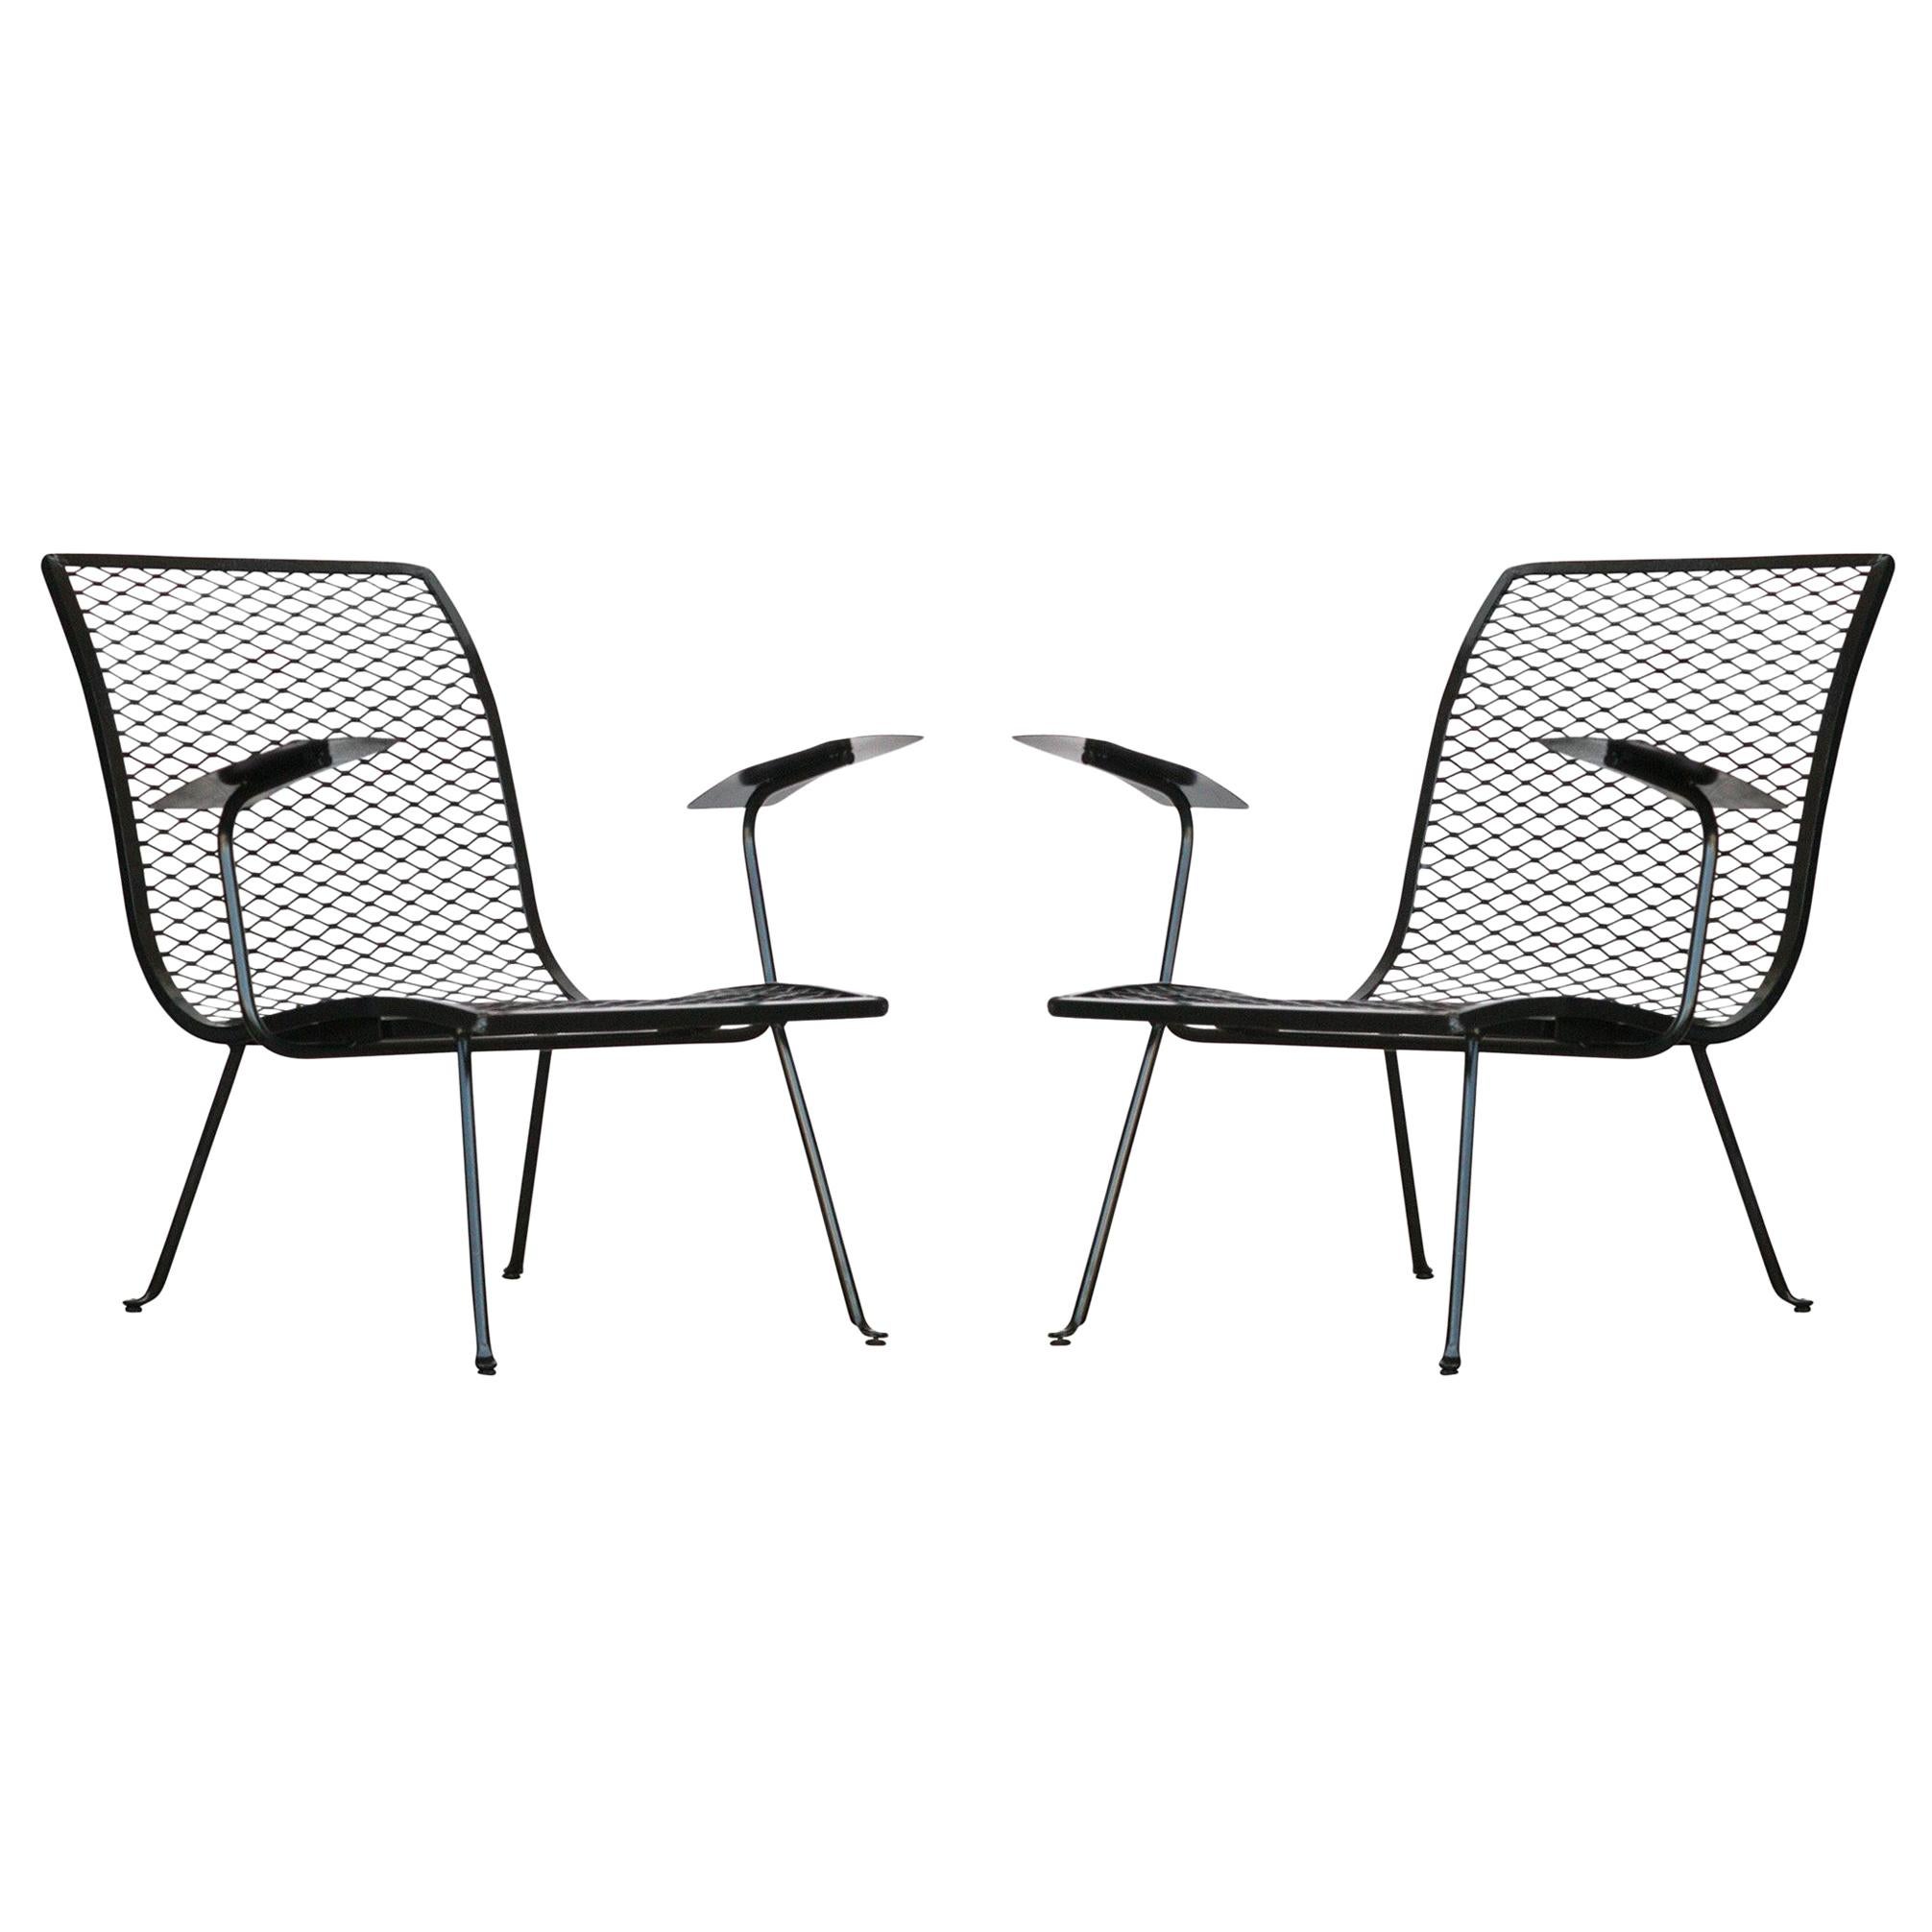 Pair of Outdoor Patio Lounge Chairs by Karl Lightfoot Studio